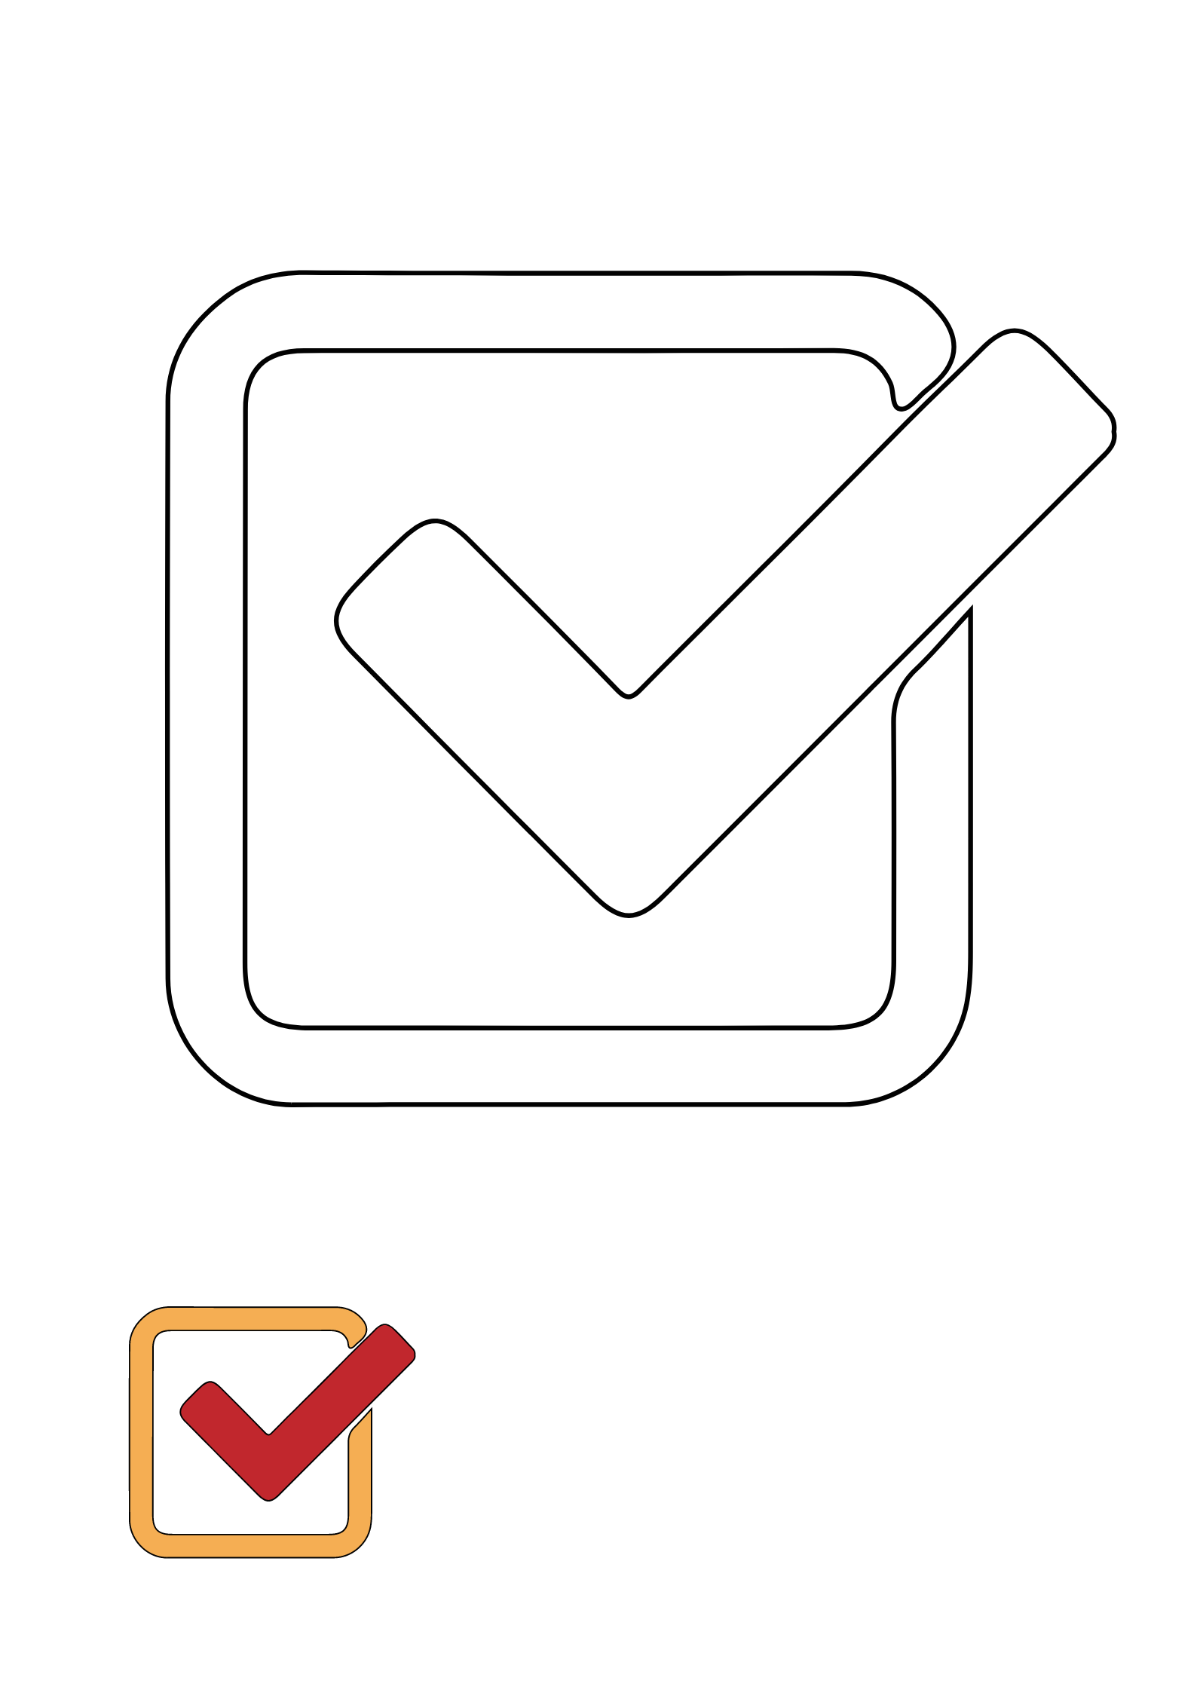 Correct Check Mark coloring page Template